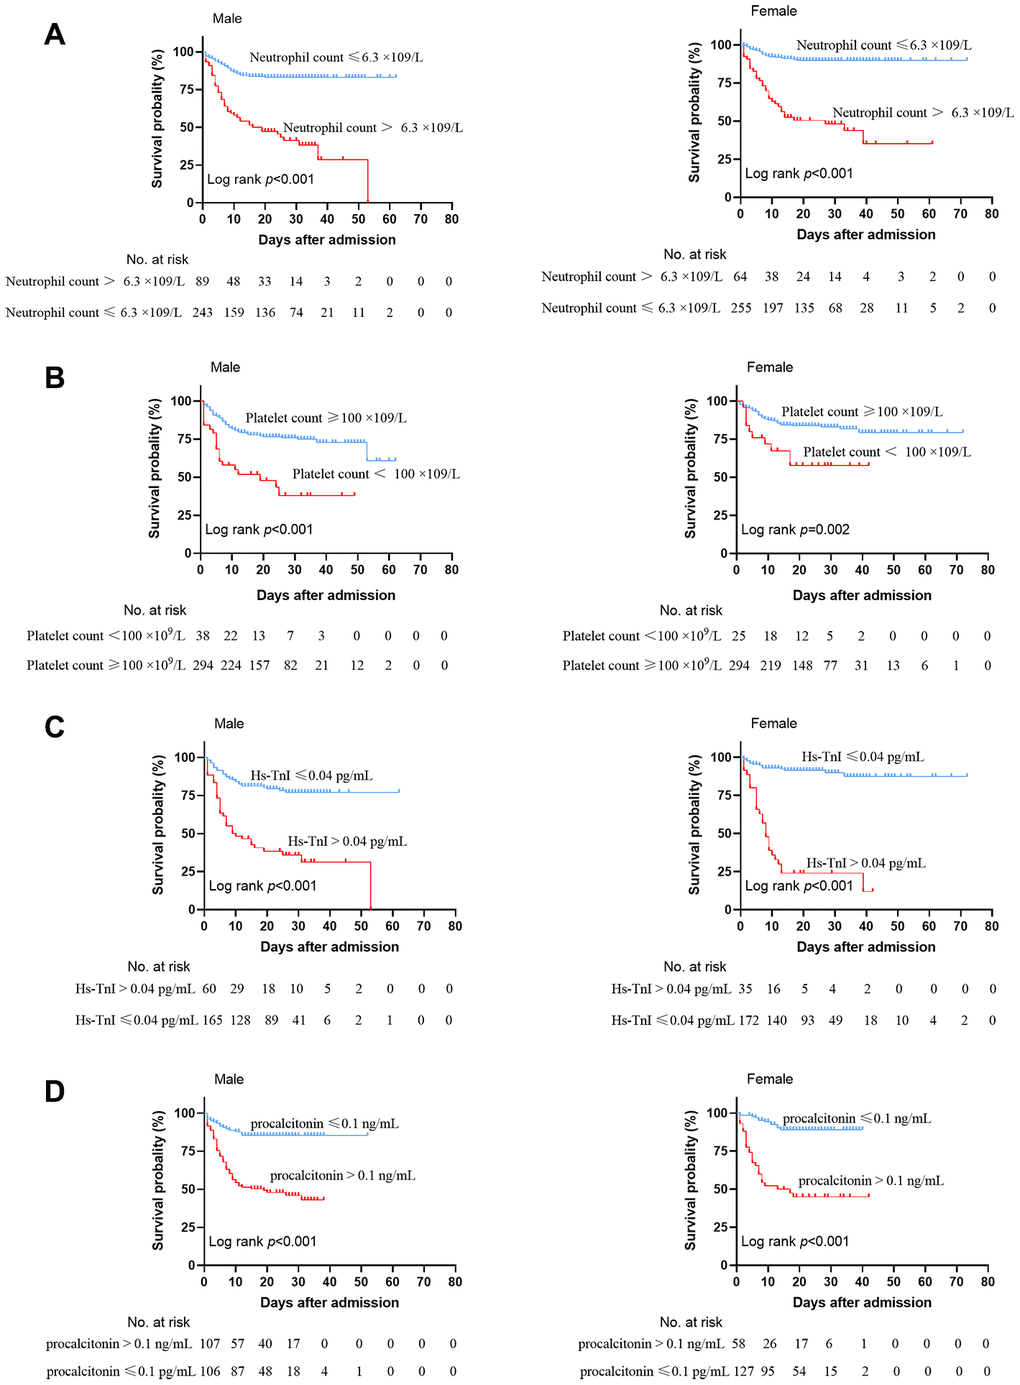 Kaplan-Meier survival curves for mortality between male and female patients. (A) Neutrophil count. (B) Platelet count. (C) Hs-TnI ≤ 0.04 pg/mL. (D) procalcitonin ≤ 0.1 ng/mL.